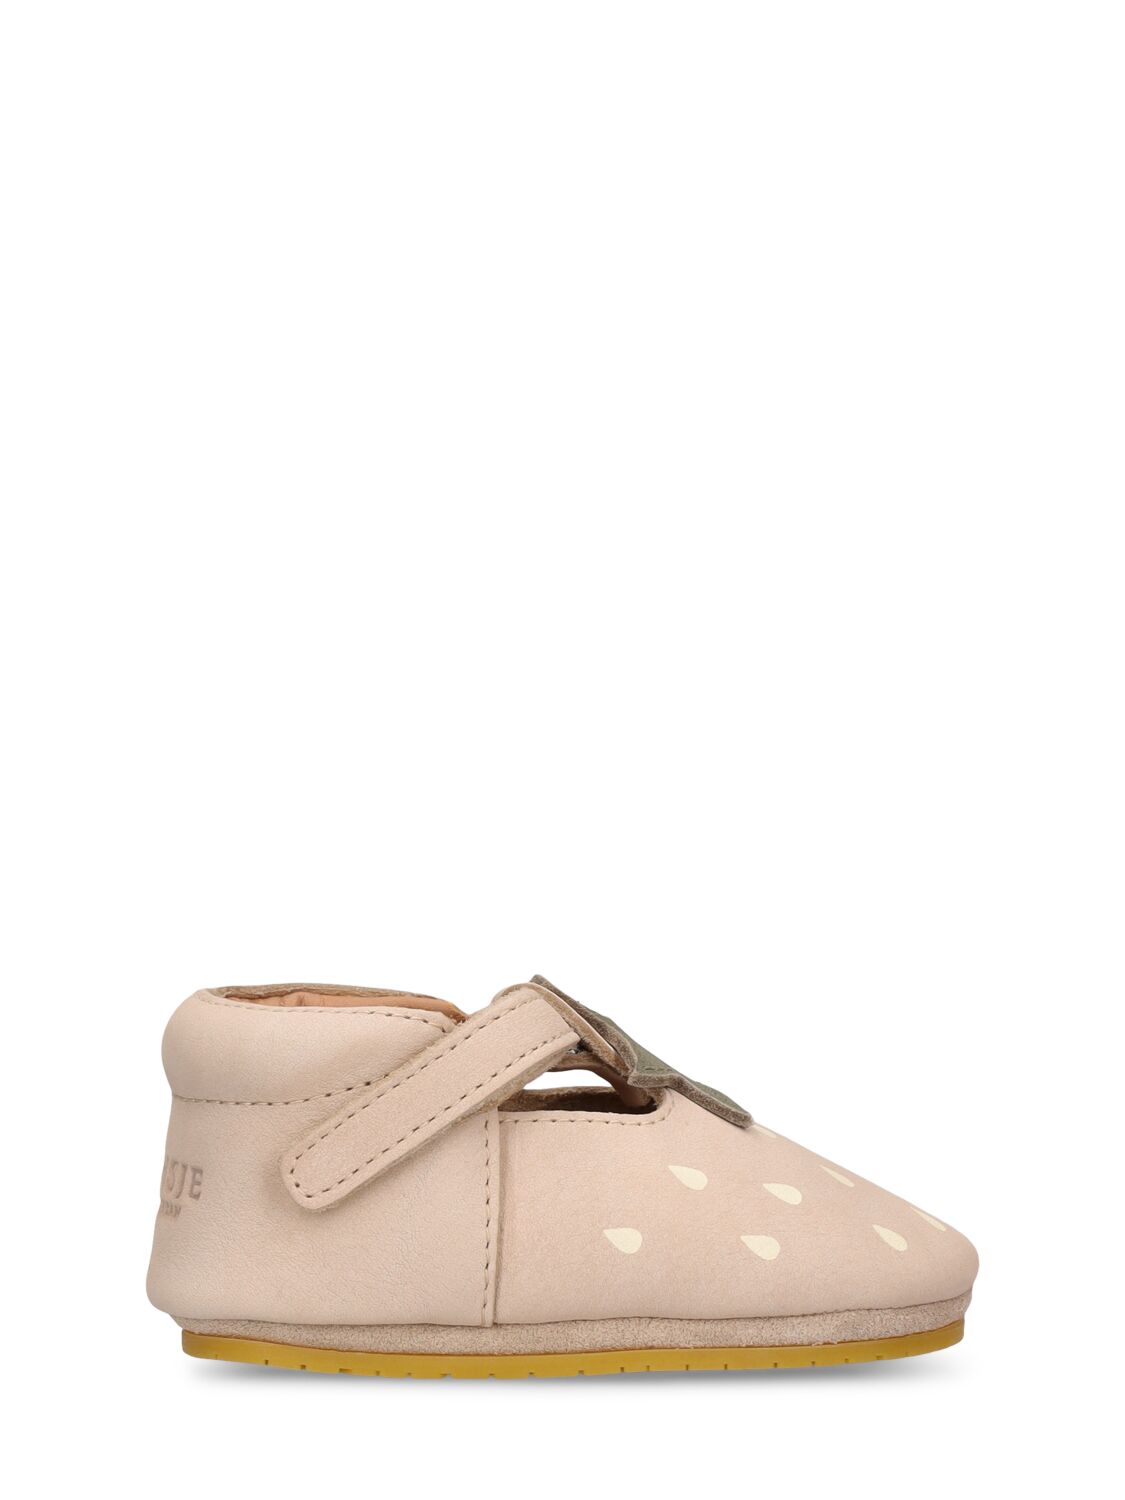 Image of Strawberry Leather Pre-walker Shoes